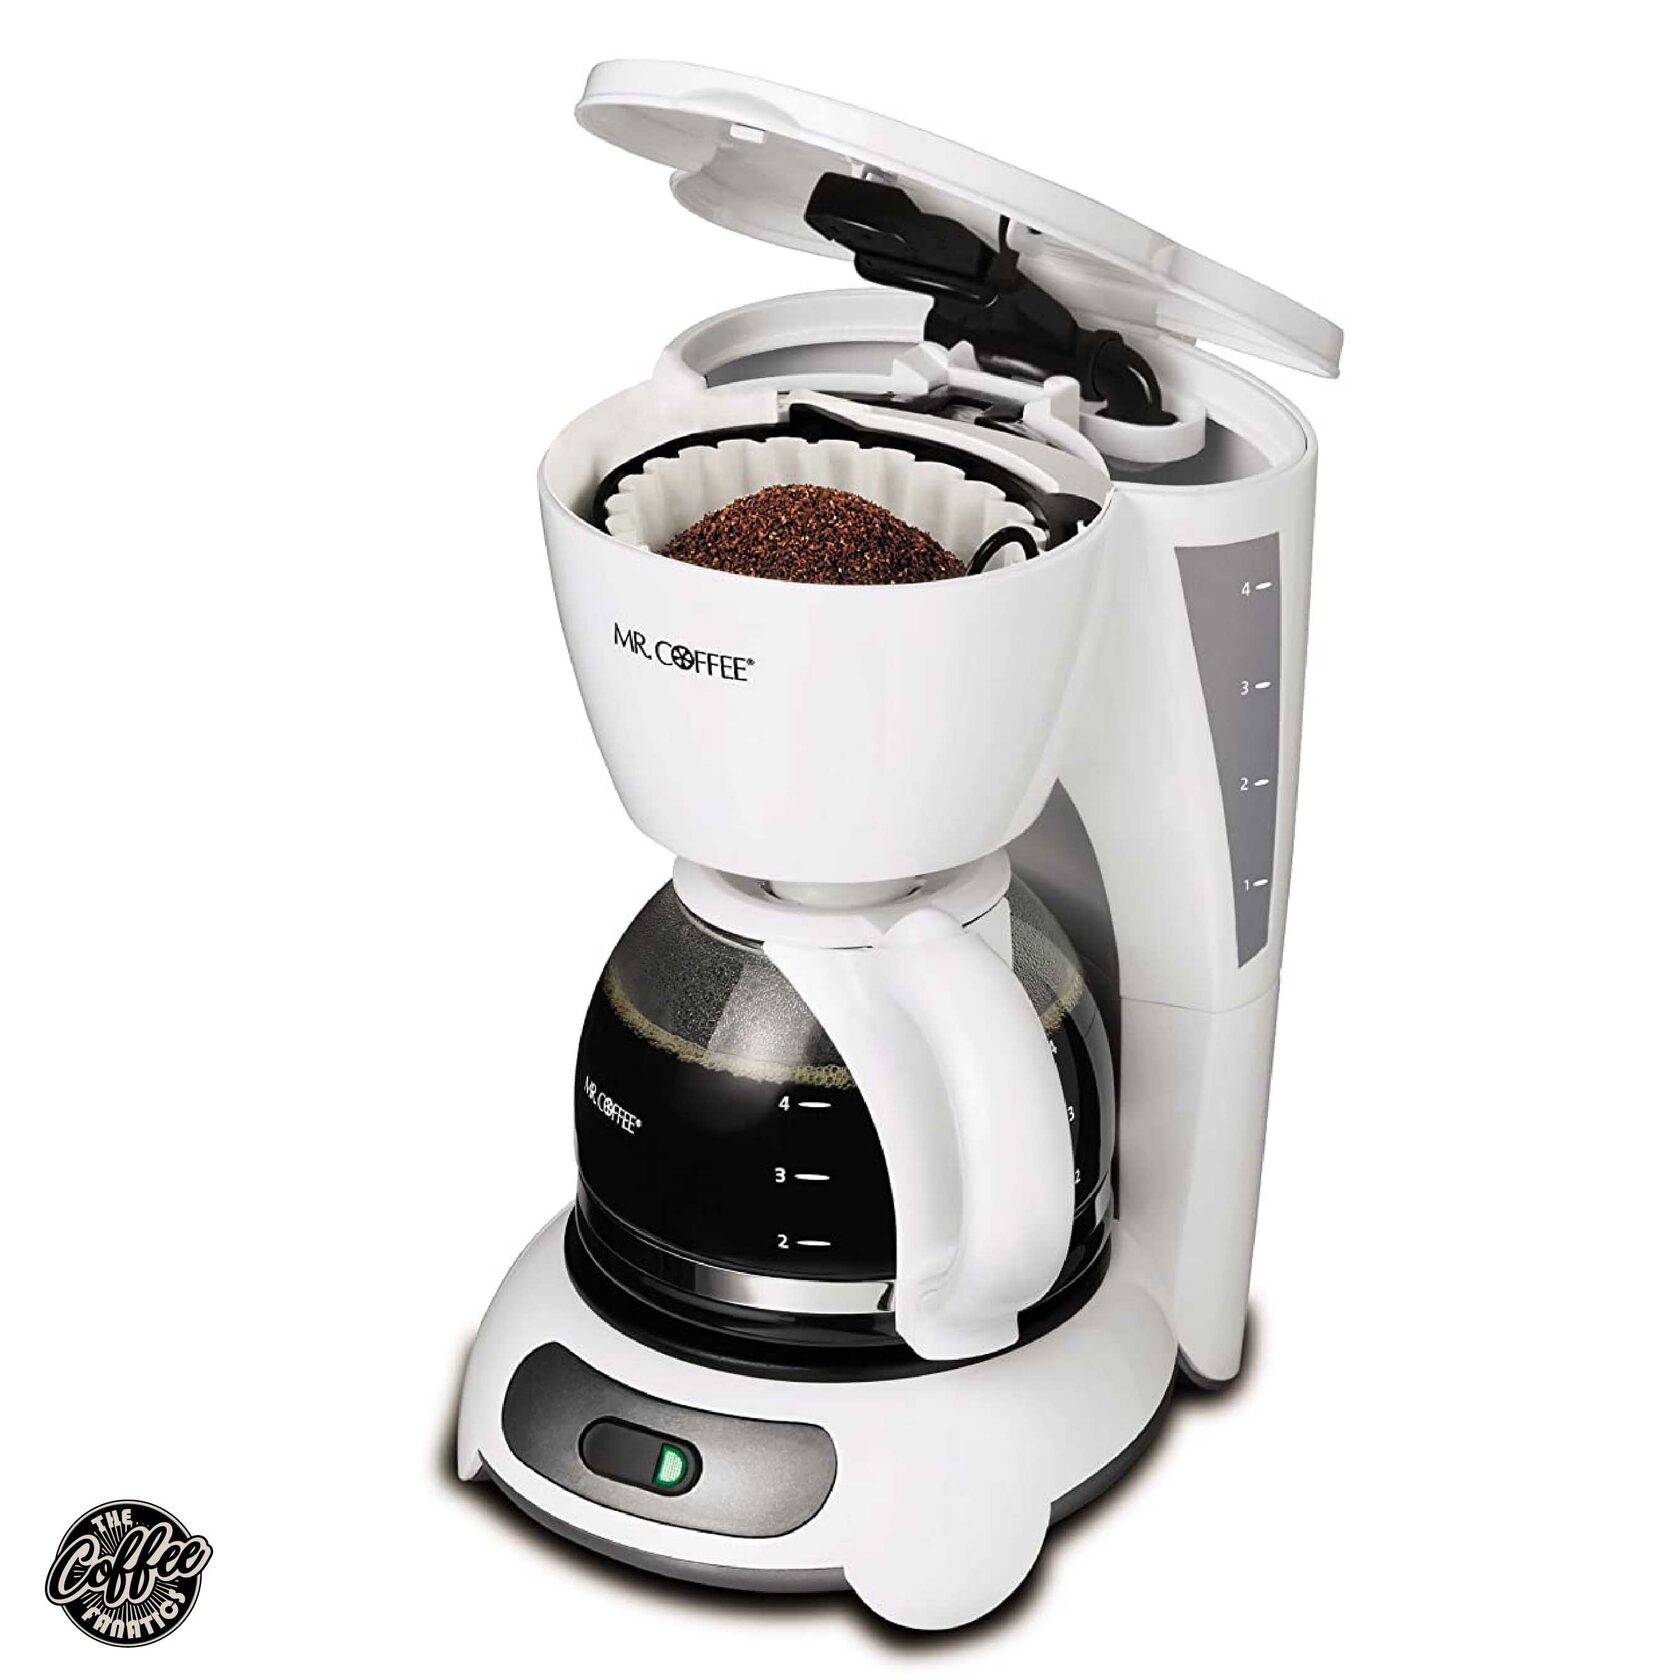 Mr. Coffee 4-Cup Coffee Maker, White - DR4-RB (Used)